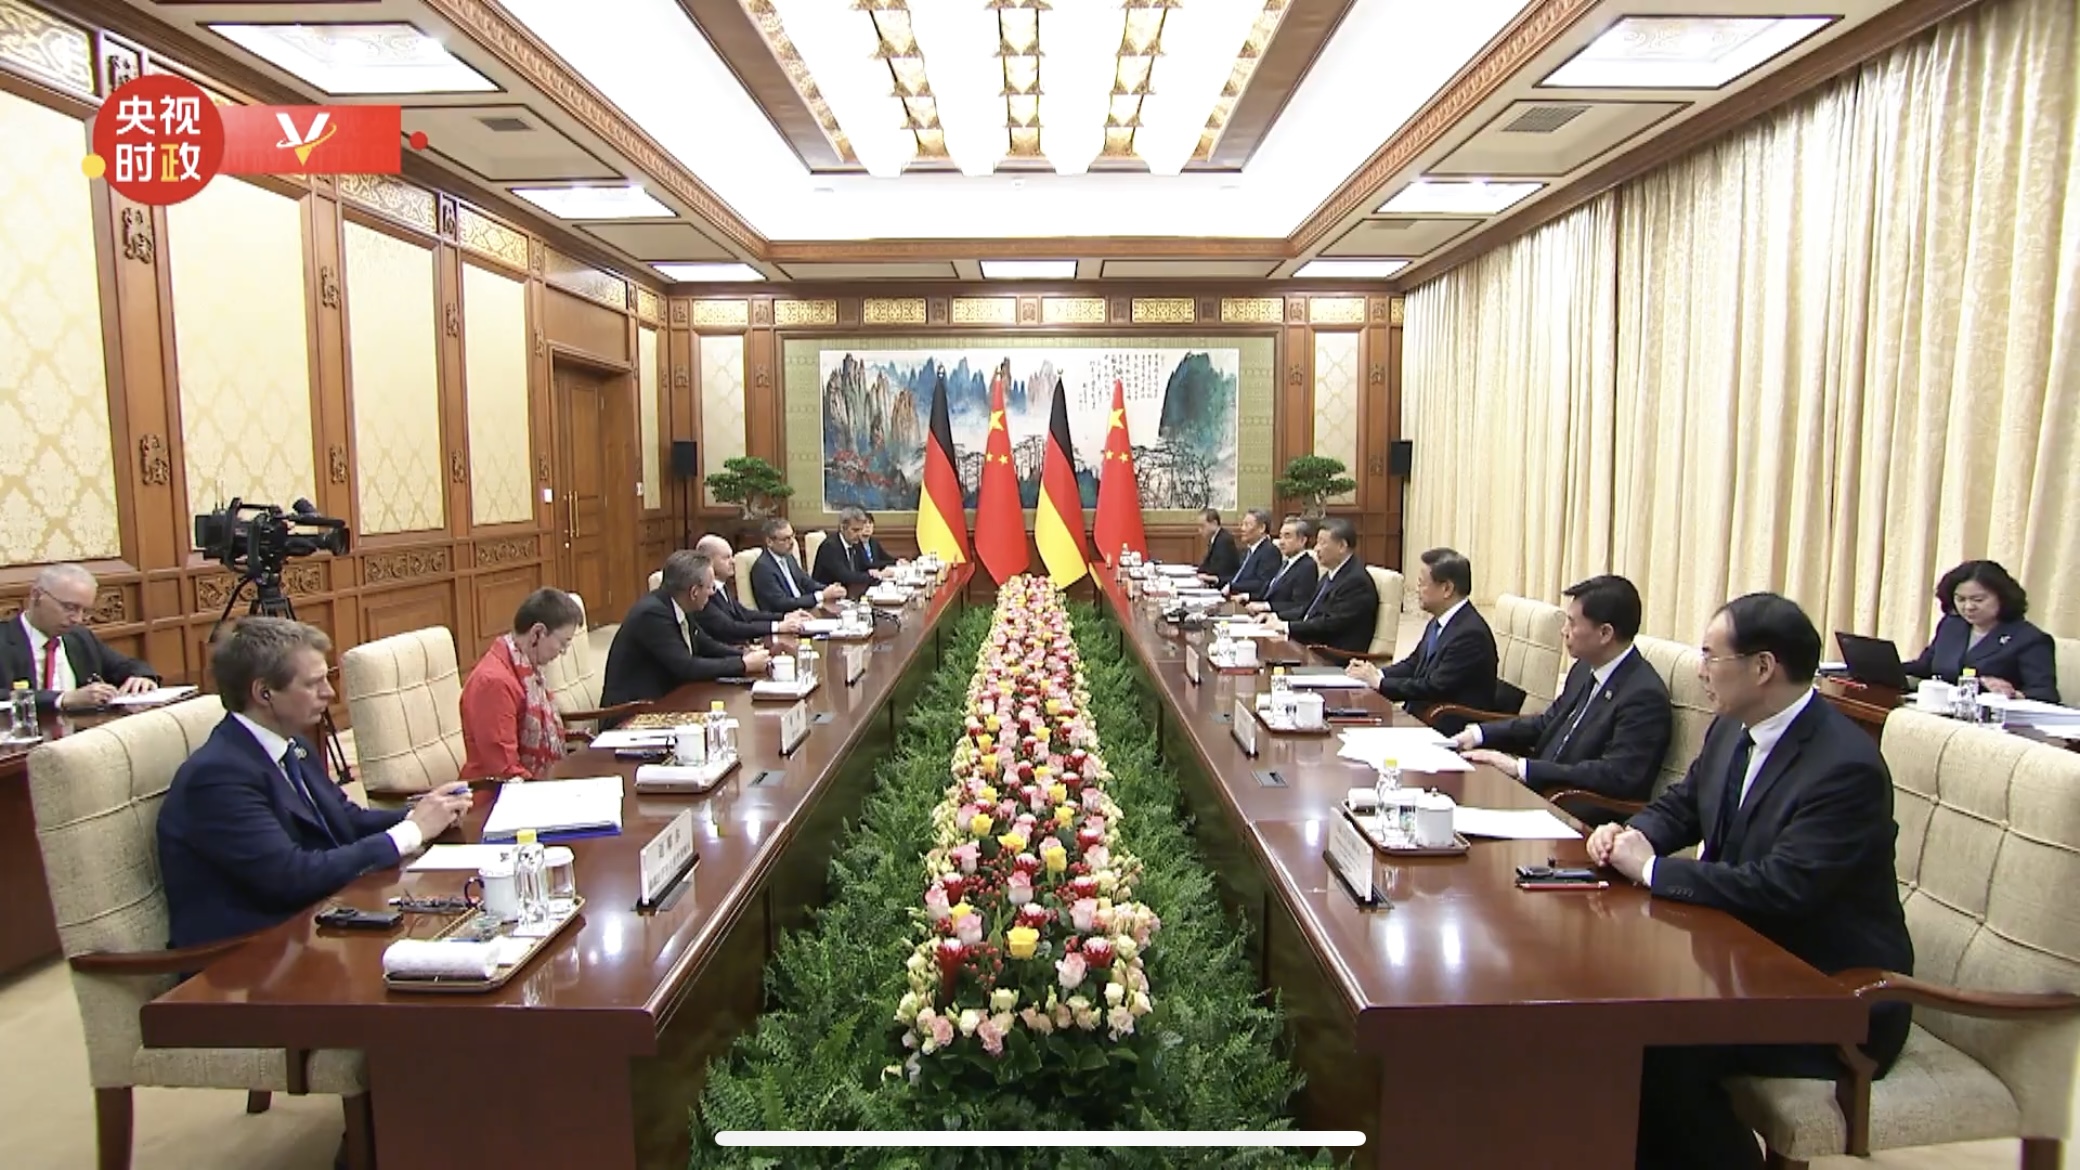 President Xi: China-Germany cooperation not 'risk' but opportunity